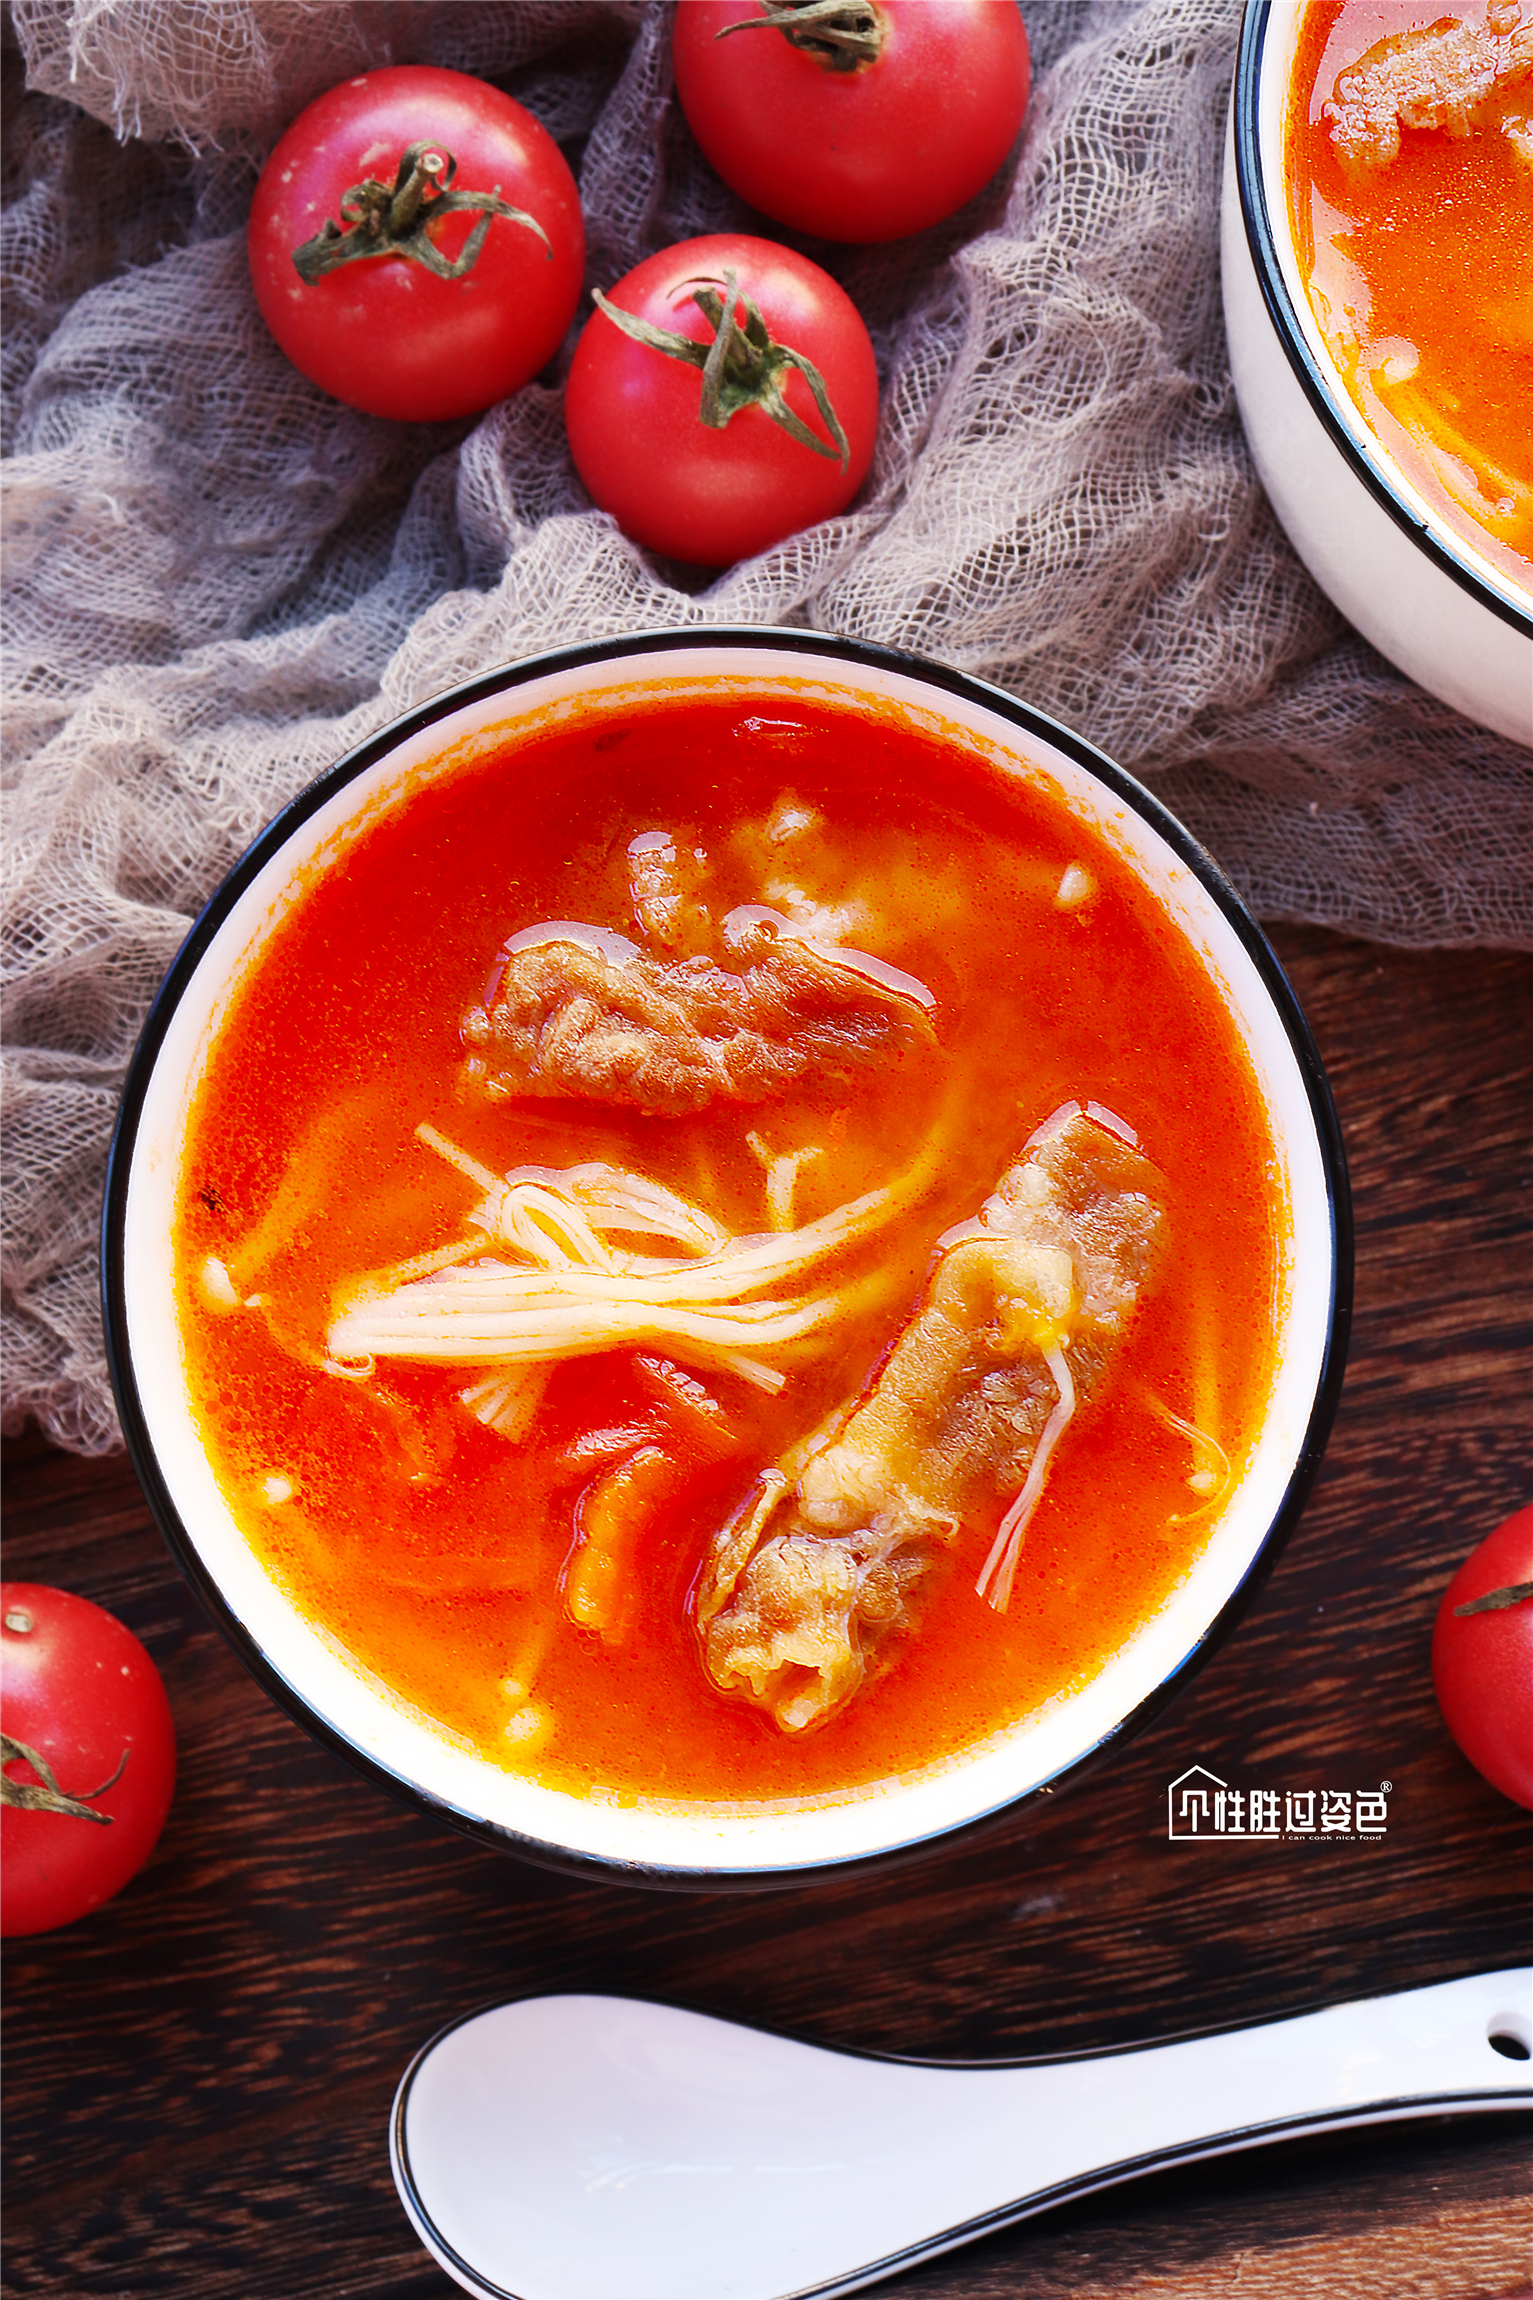 
The practice of soup of tomato fat cattle, how is soup of tomato fat cattle done delicious